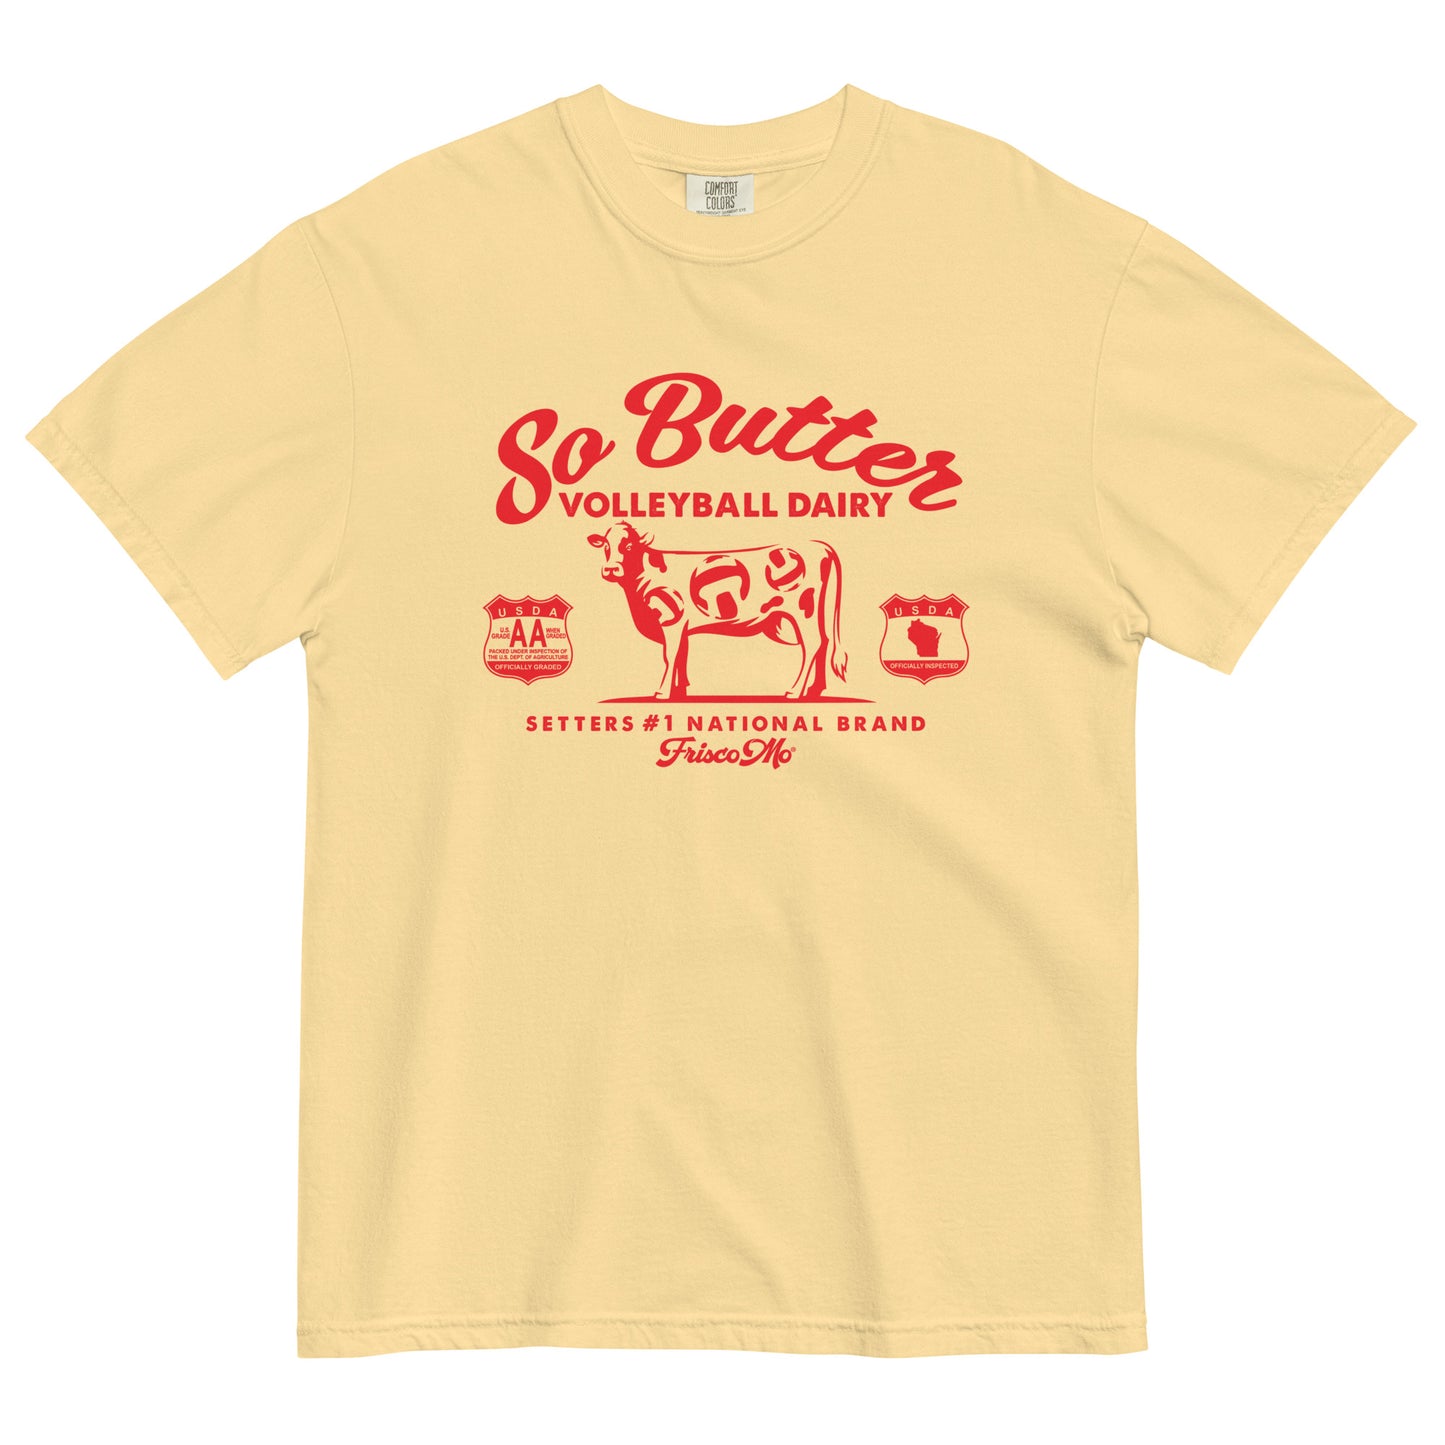 So Butter Volleyball Dairy Tee